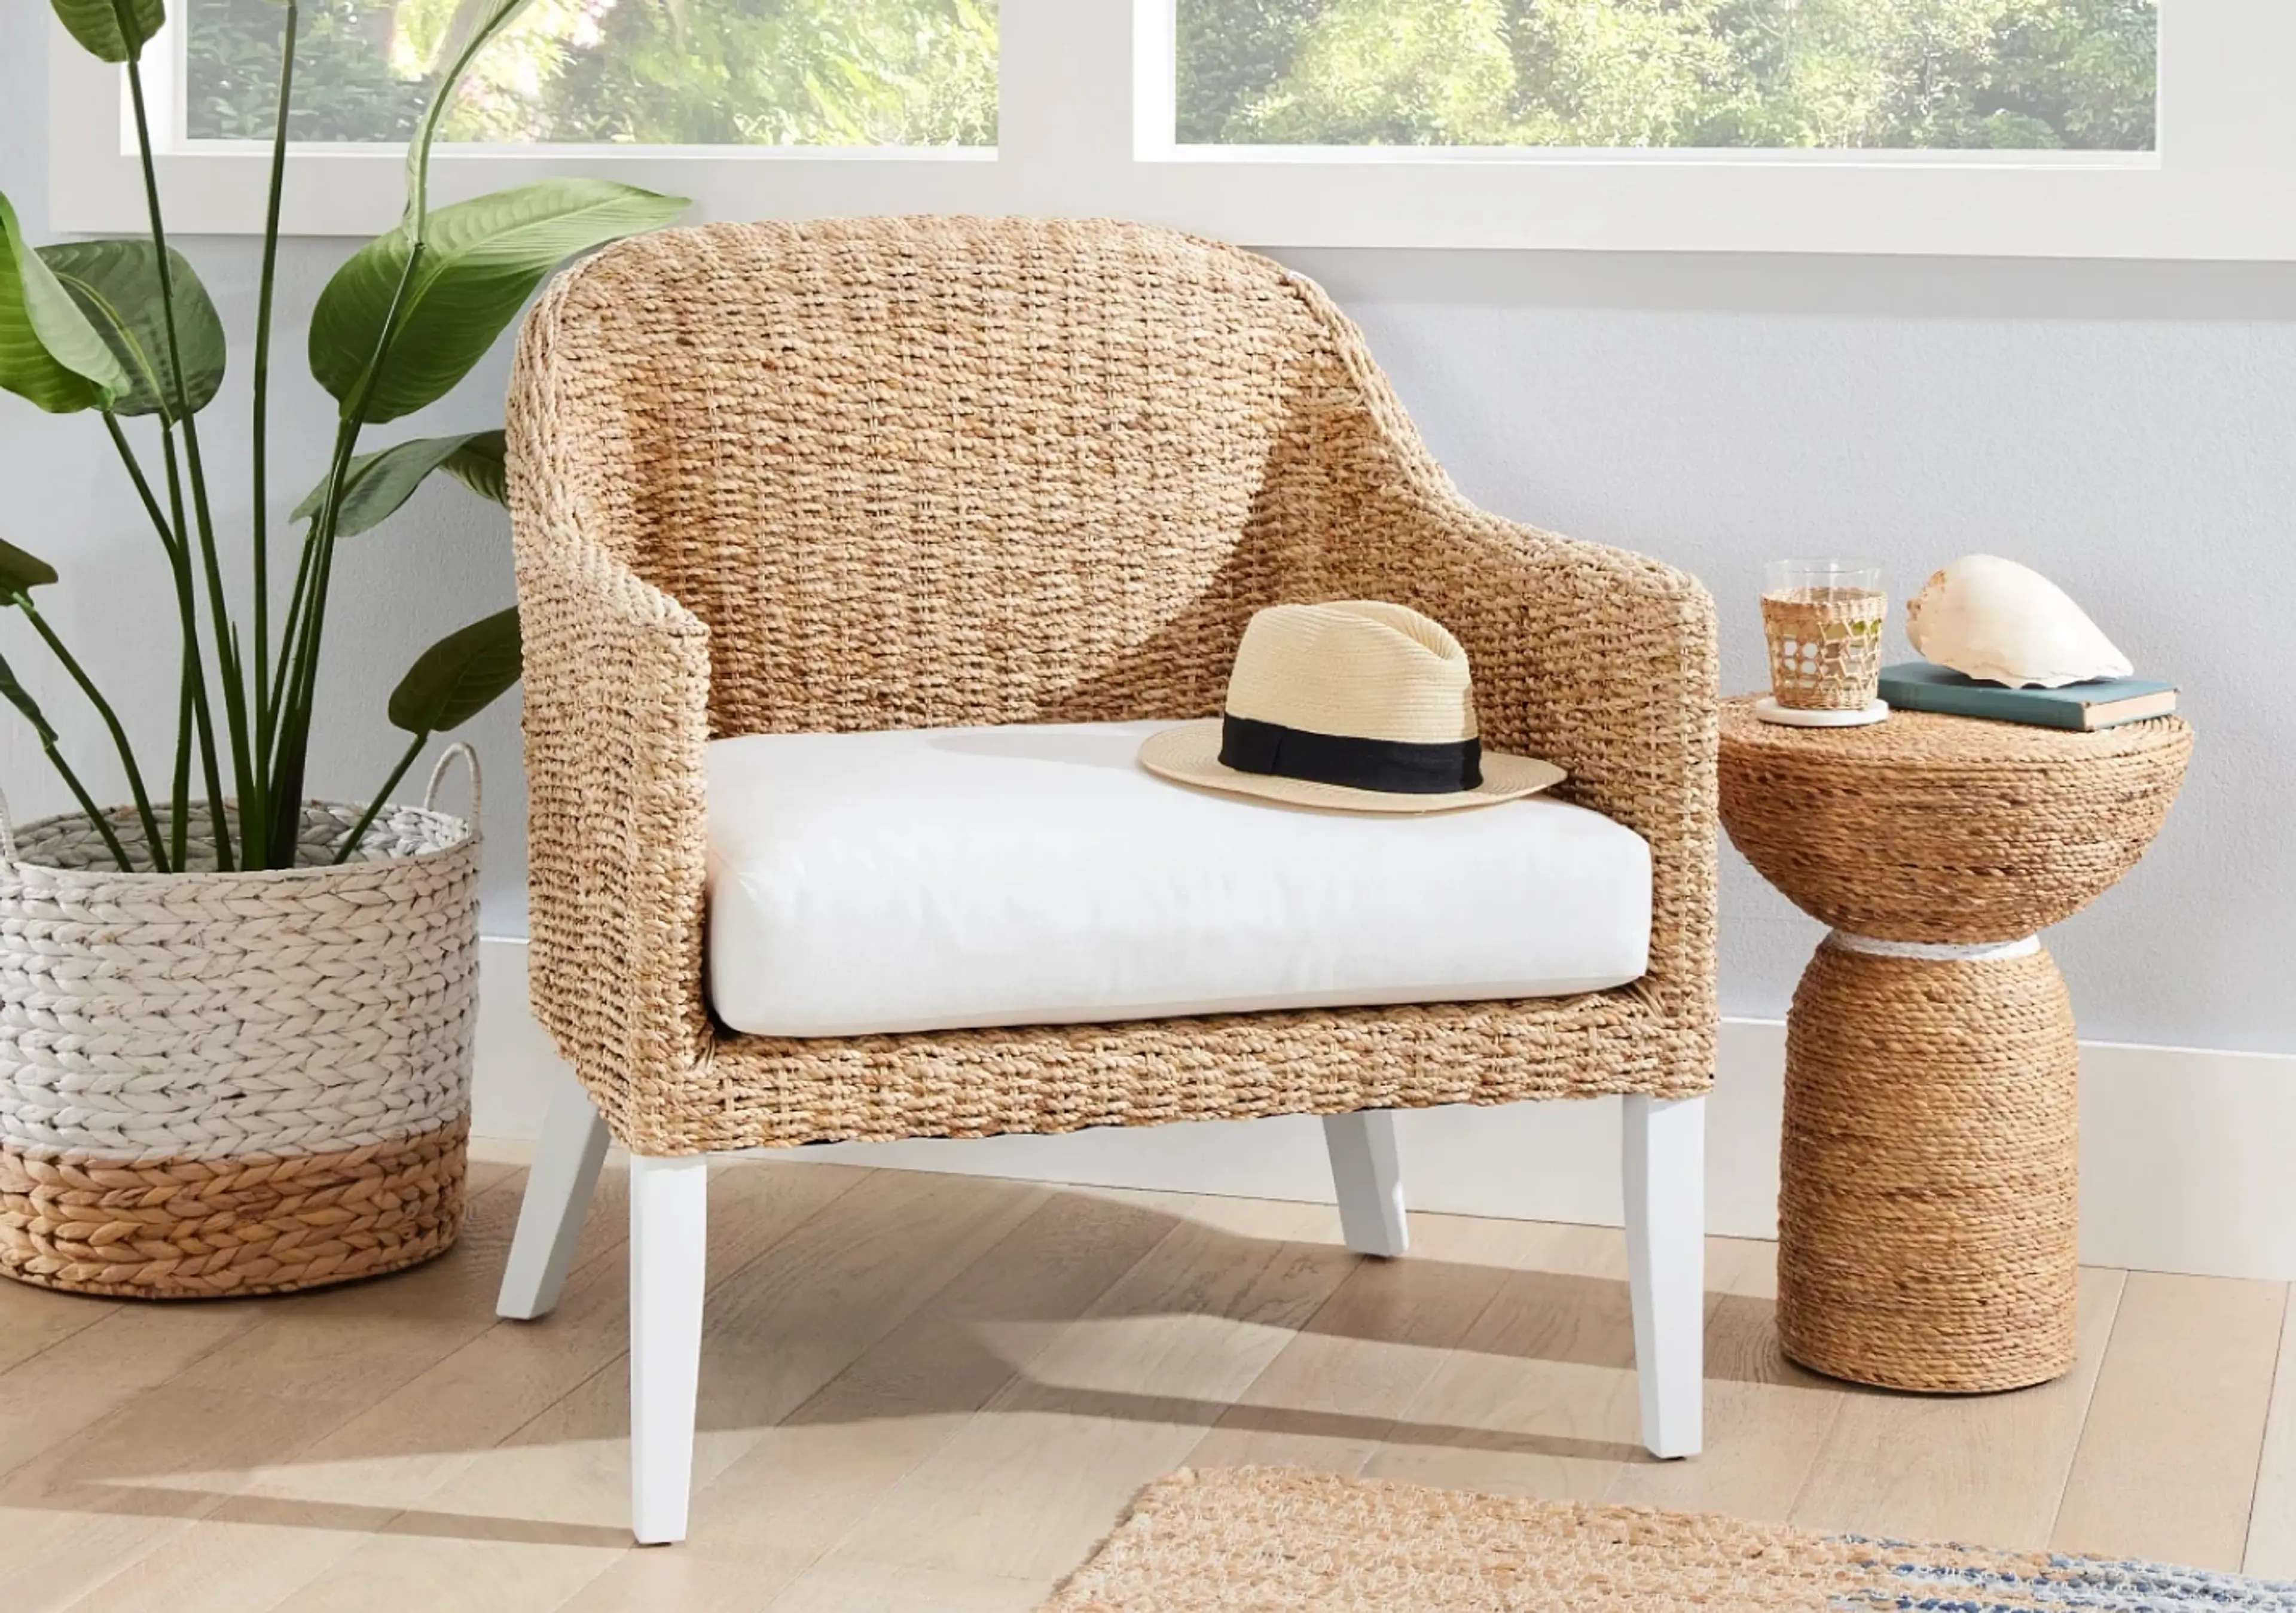 Woven Texture: Wicker and Rattan